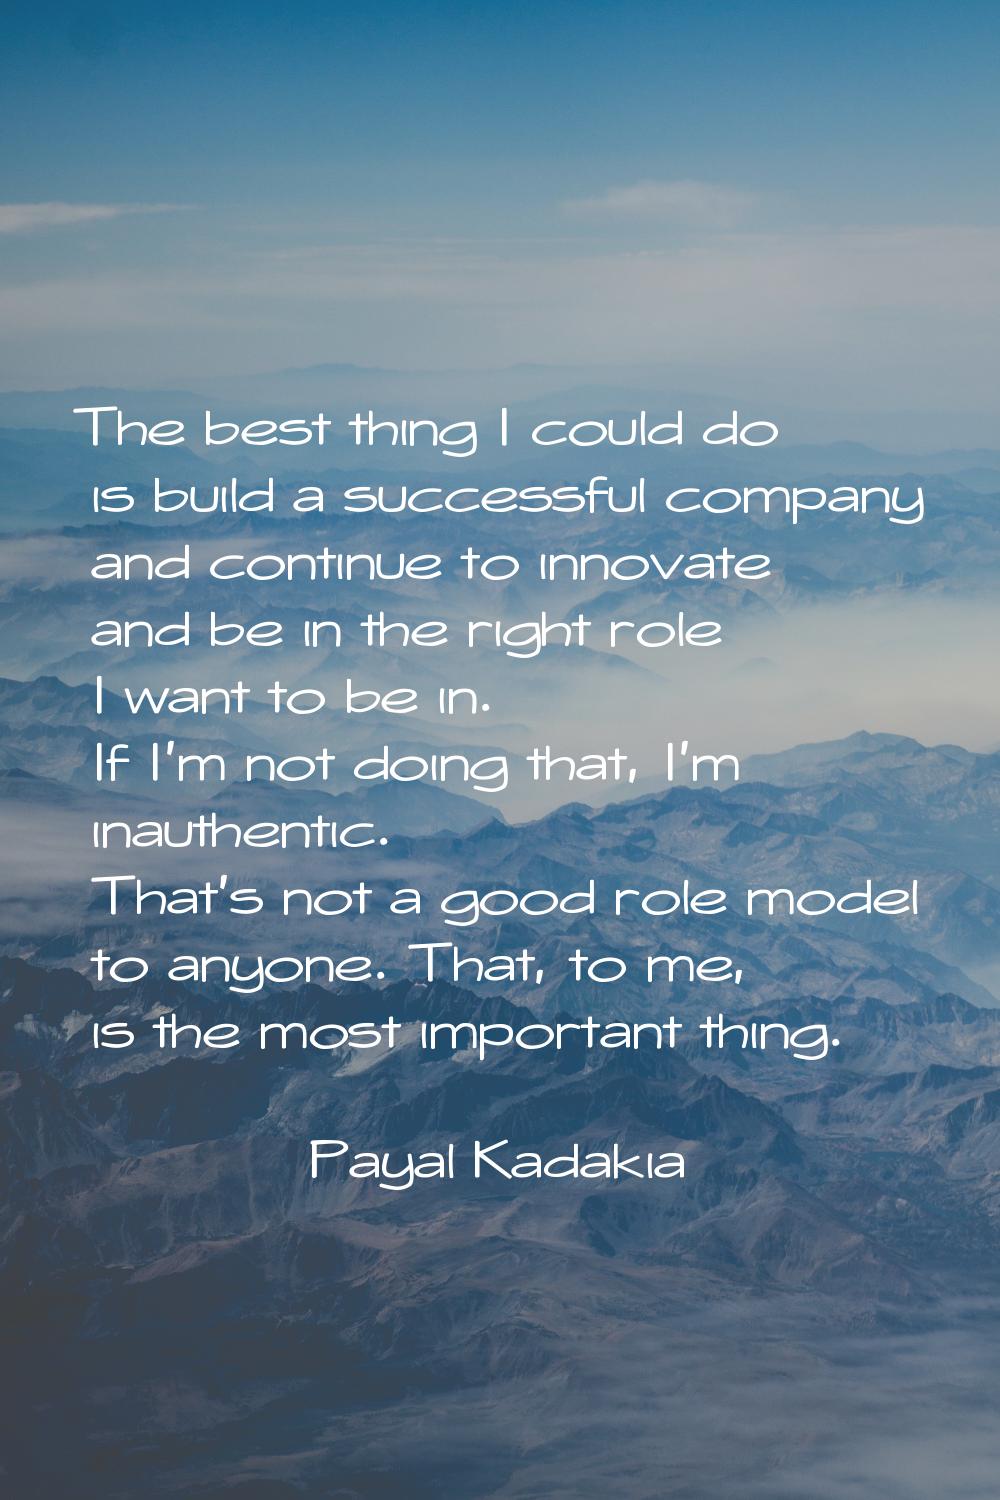 The best thing I could do is build a successful company and continue to innovate and be in the righ